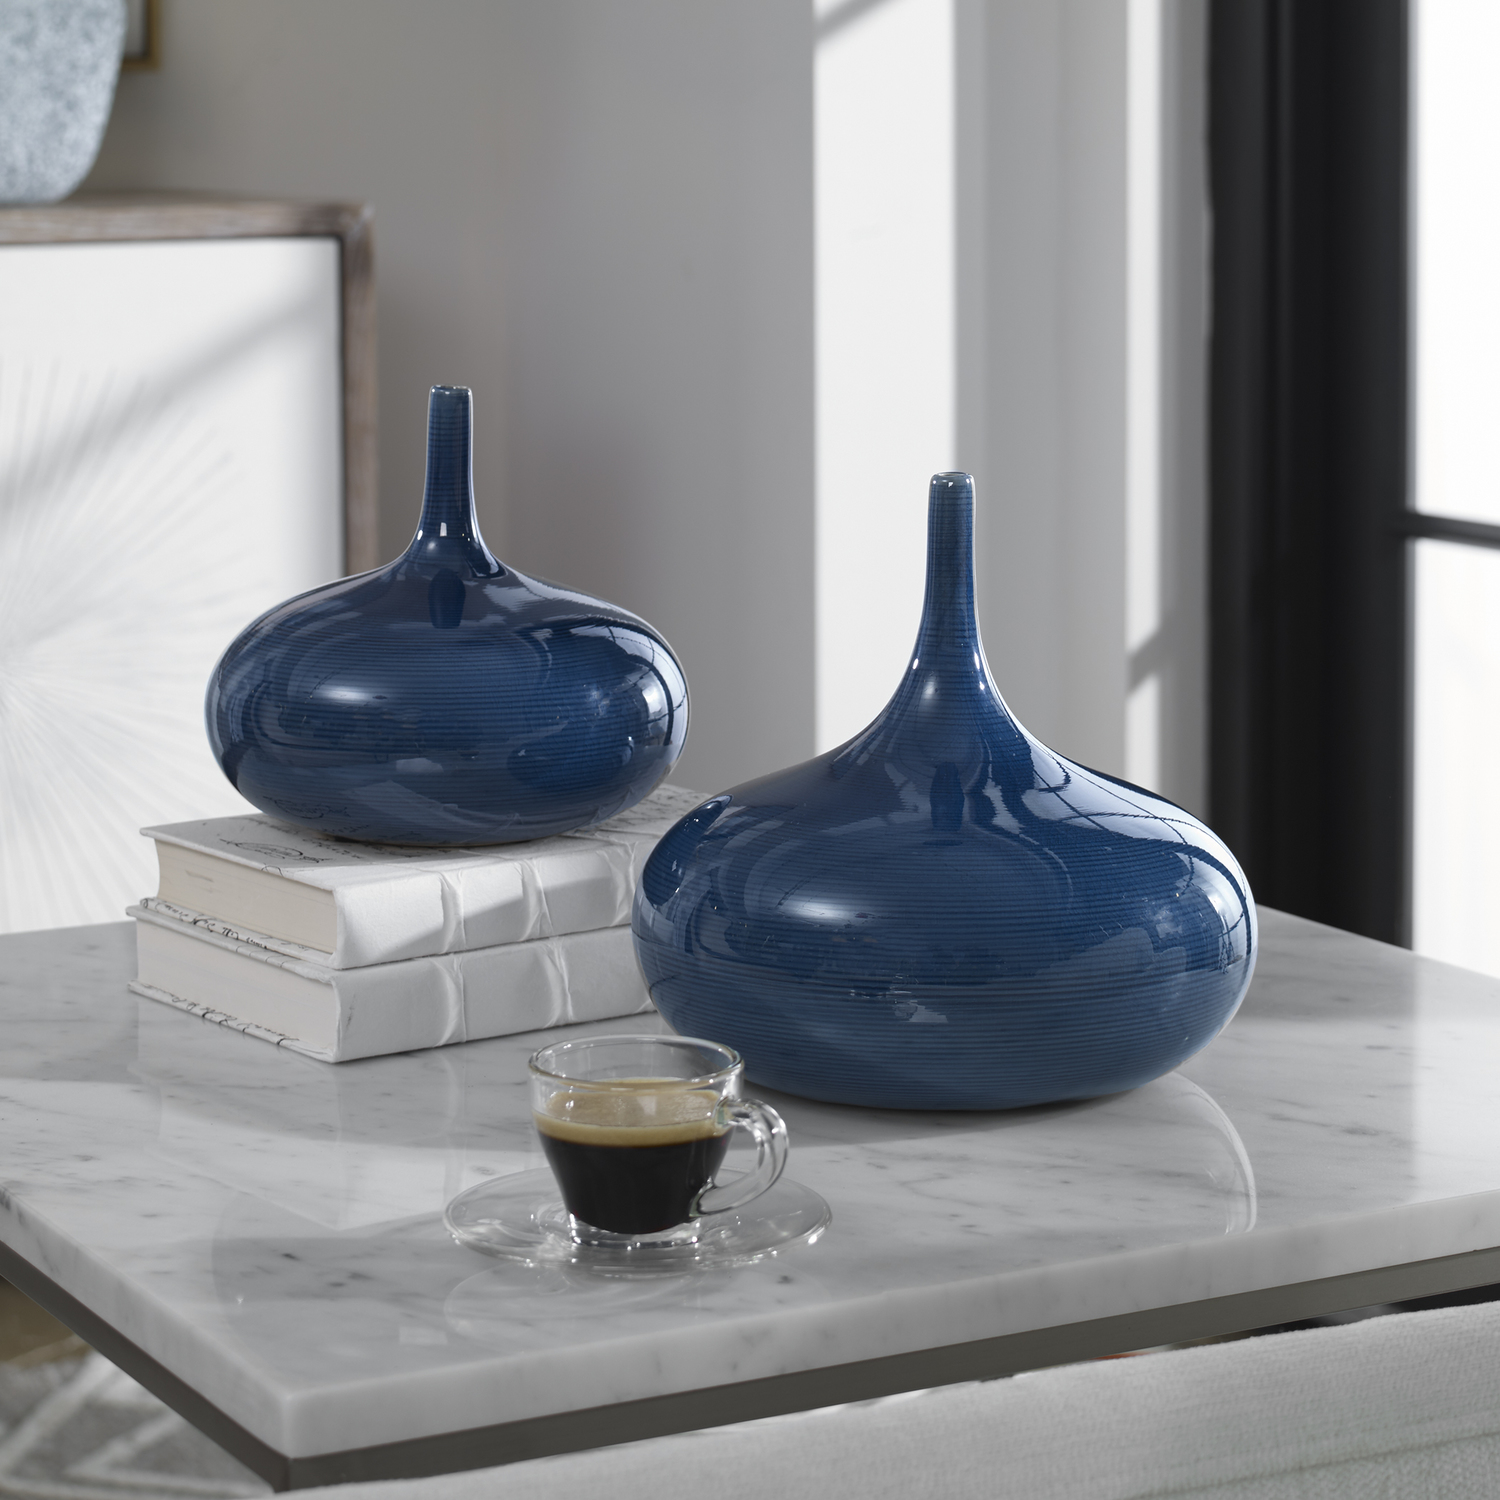 large tall white vase Uttermost Vases Urns & Finials Set Of Two, Uniquely Shaped Ceramic Stem Vases Feature A Spinning Top Pattern In Multiple Tones Of Blue.